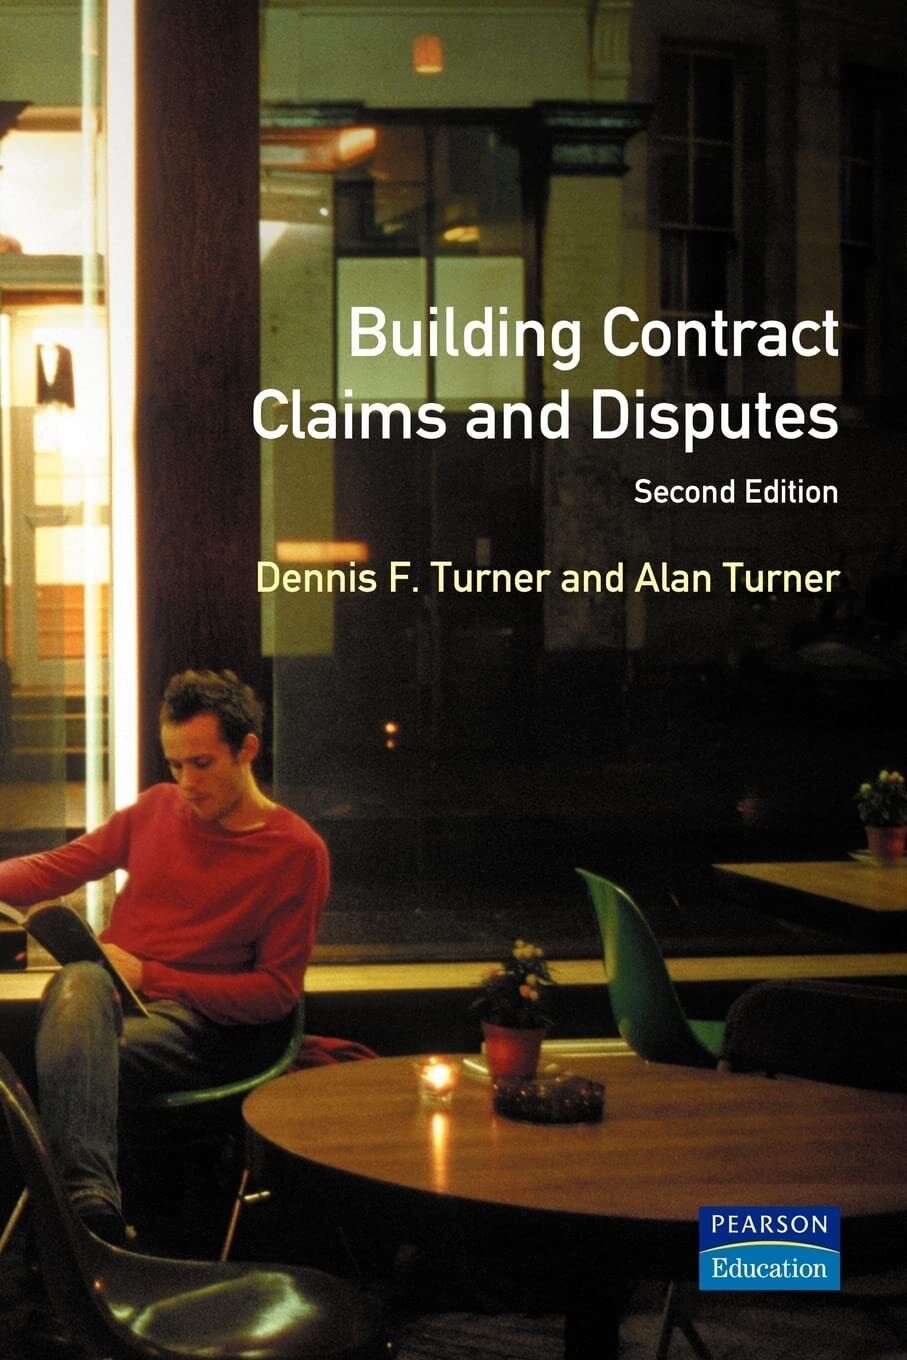 Building Contract Claims and Disputes - Dennis F. Turner, Alan Turner - 2016